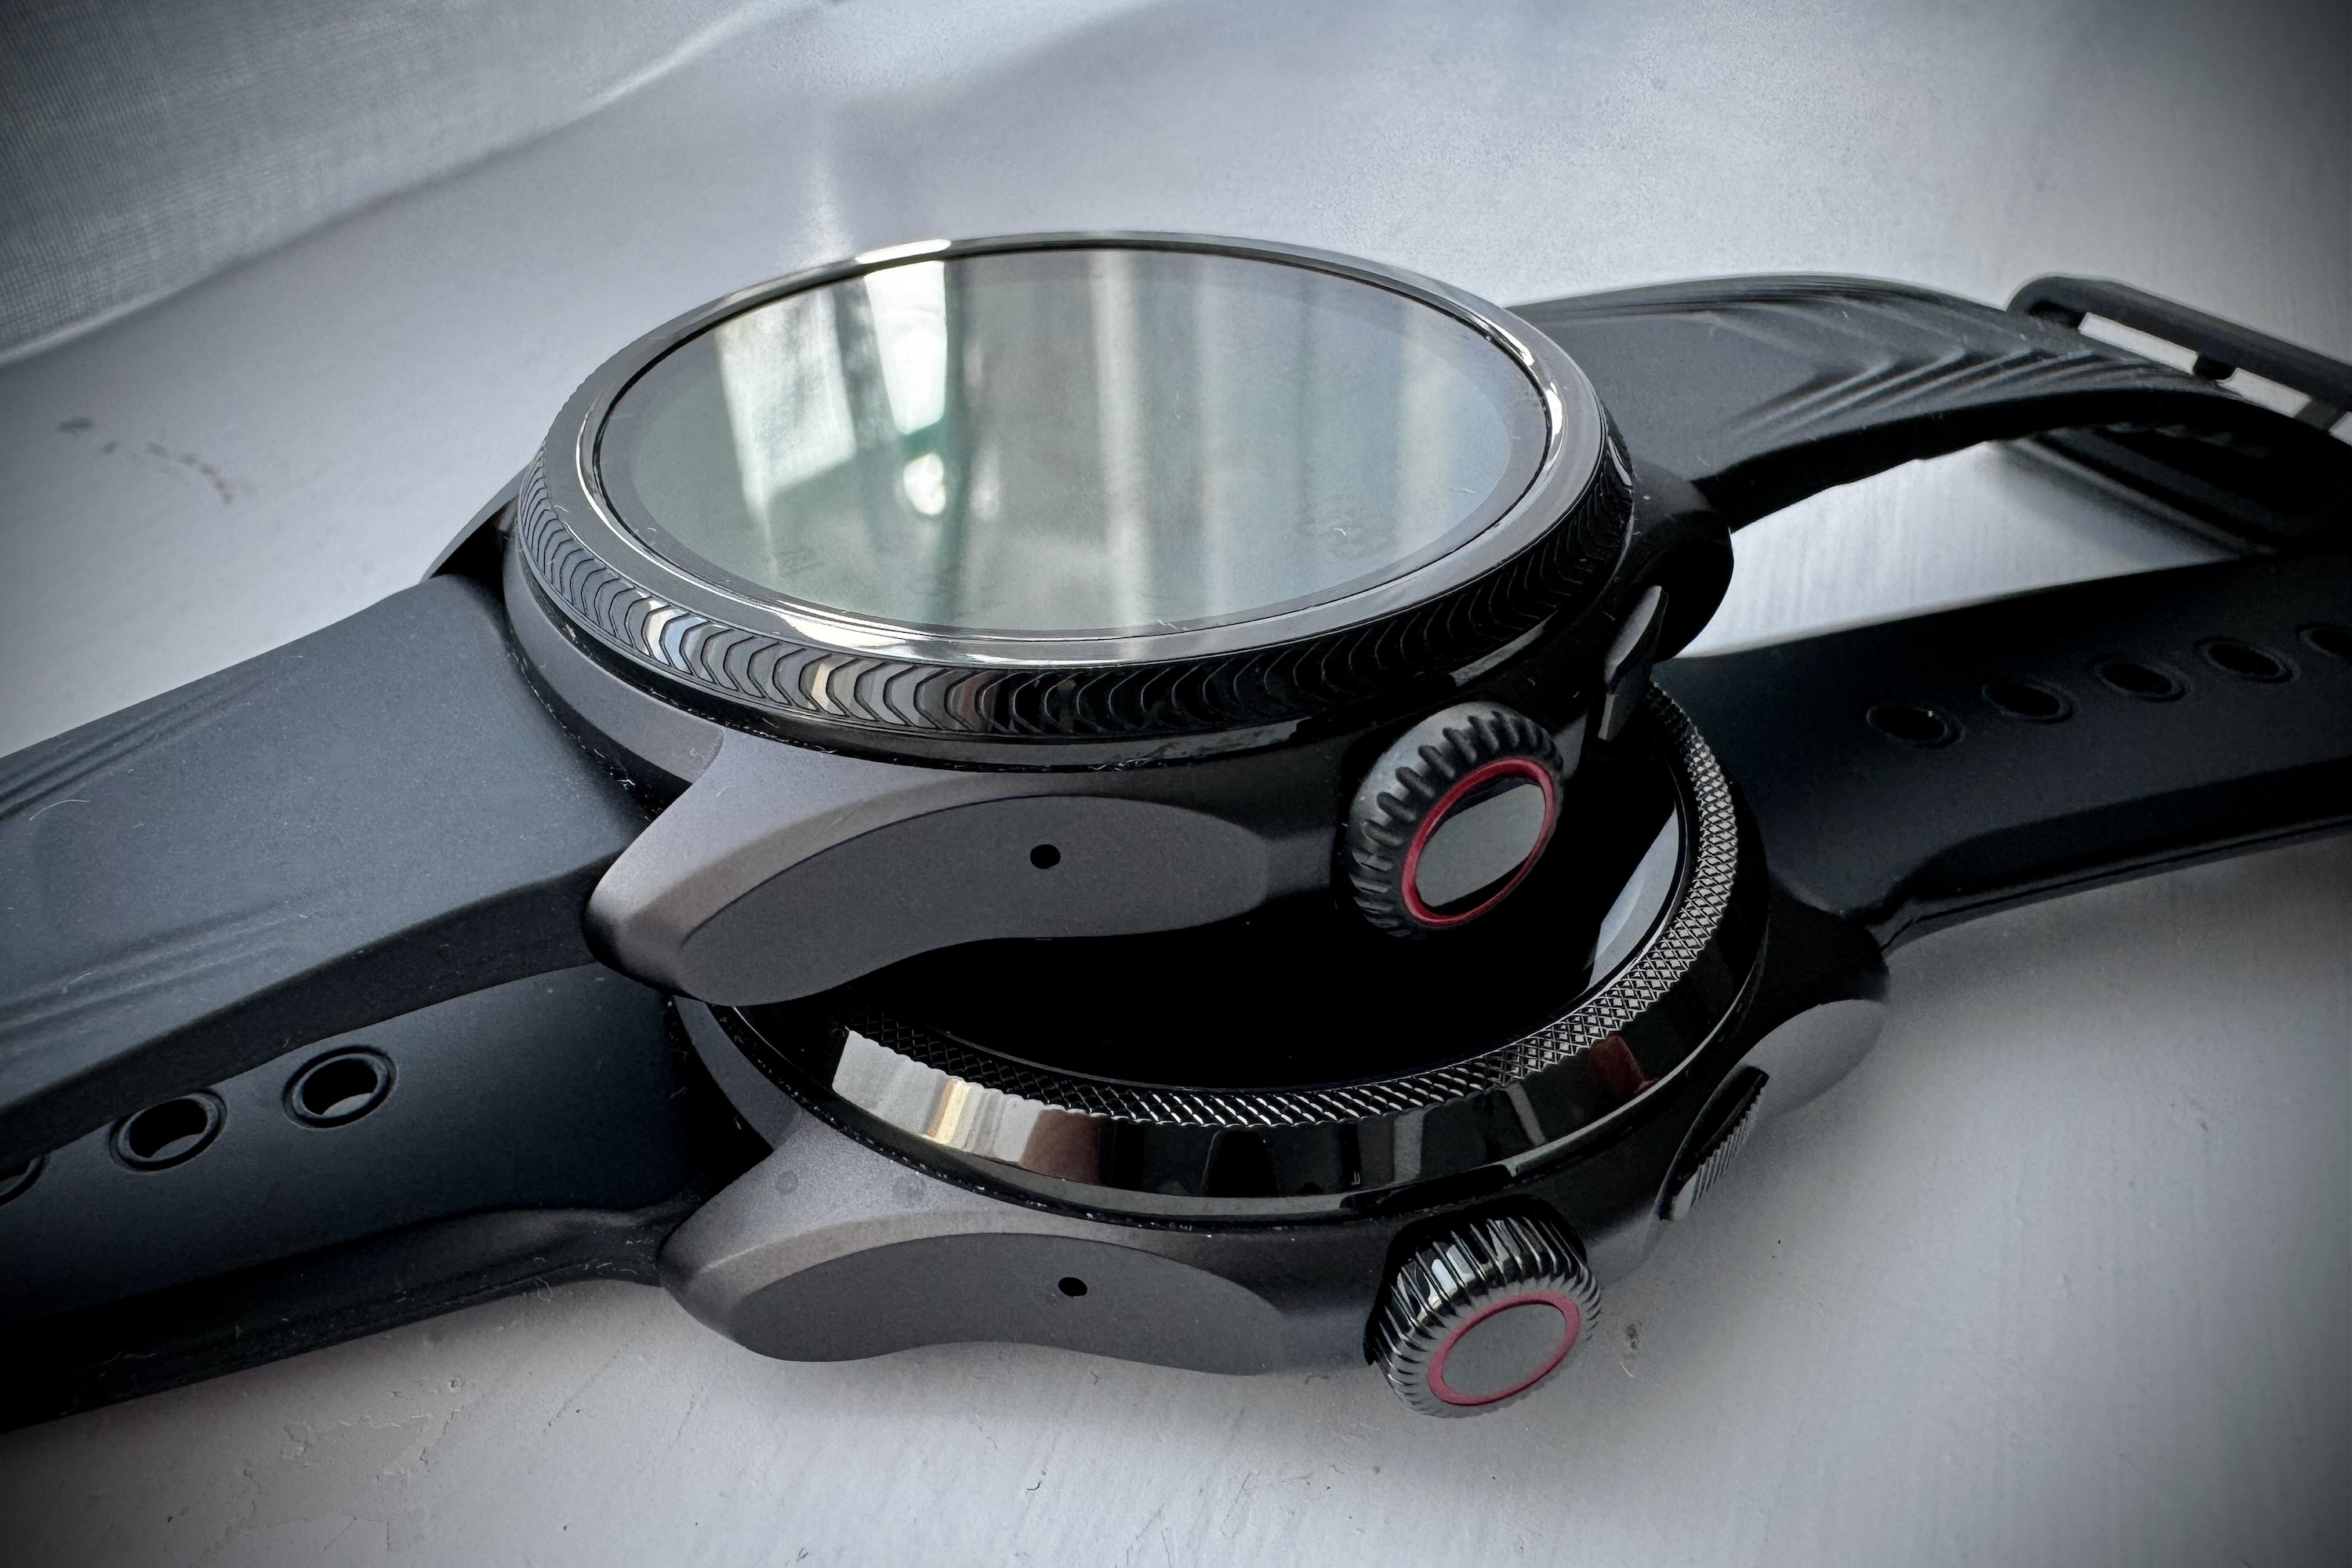 The Mobvoi TicWatch Pro 5 Enduro and the Mobvoi TicWatch Pro 5's bezels and crowns.